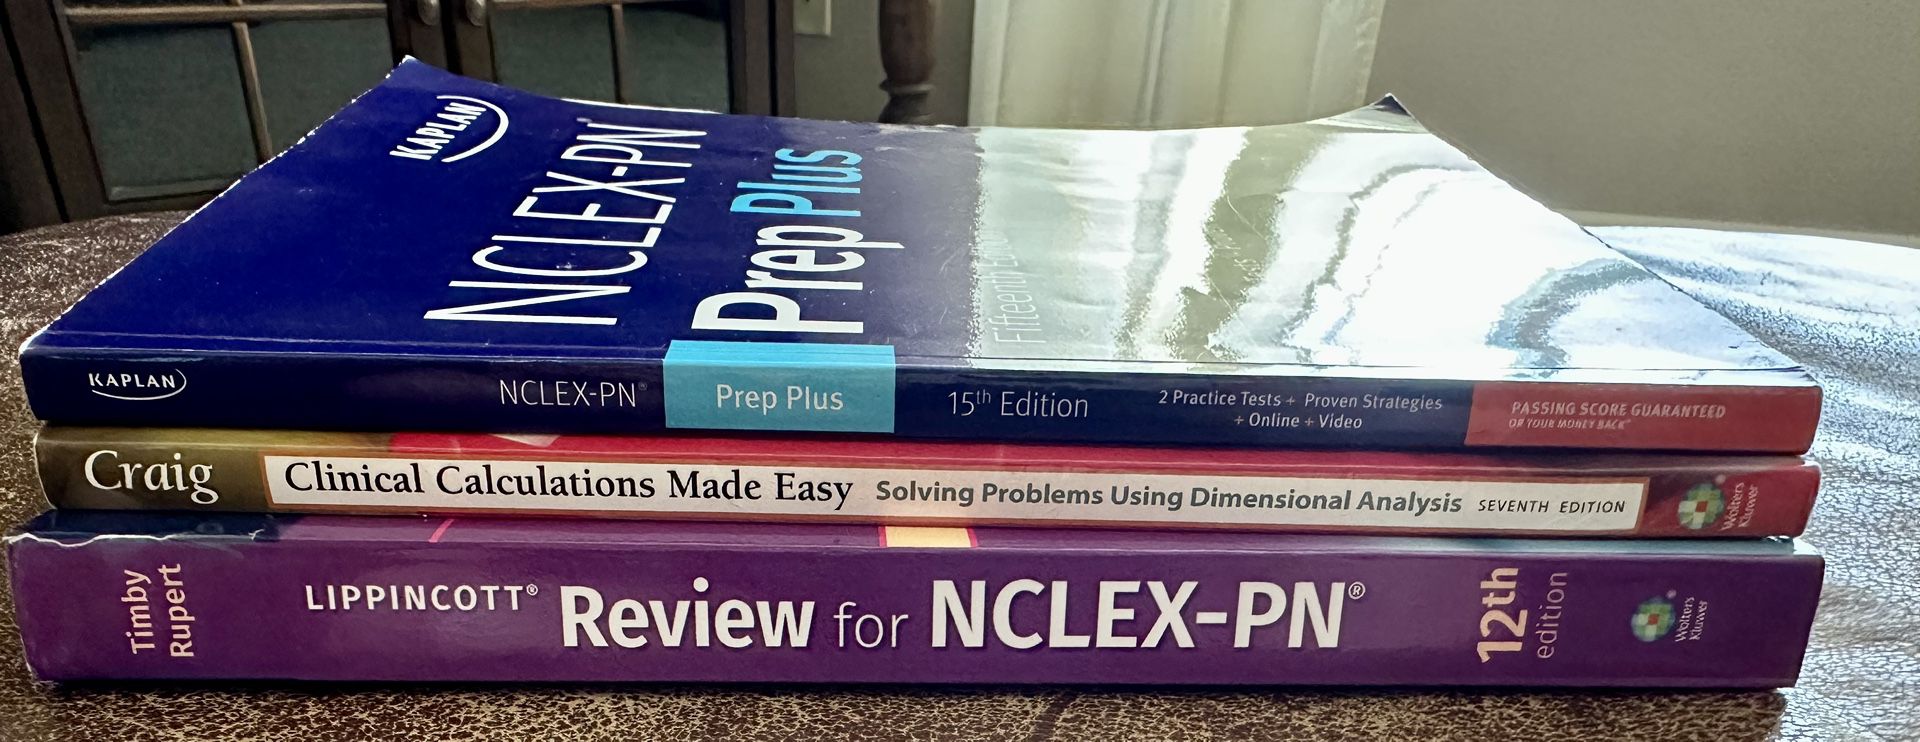 NCLEX-PN Bundle Pack Of Study Guide  Books & Textbooks, Brand New Condition